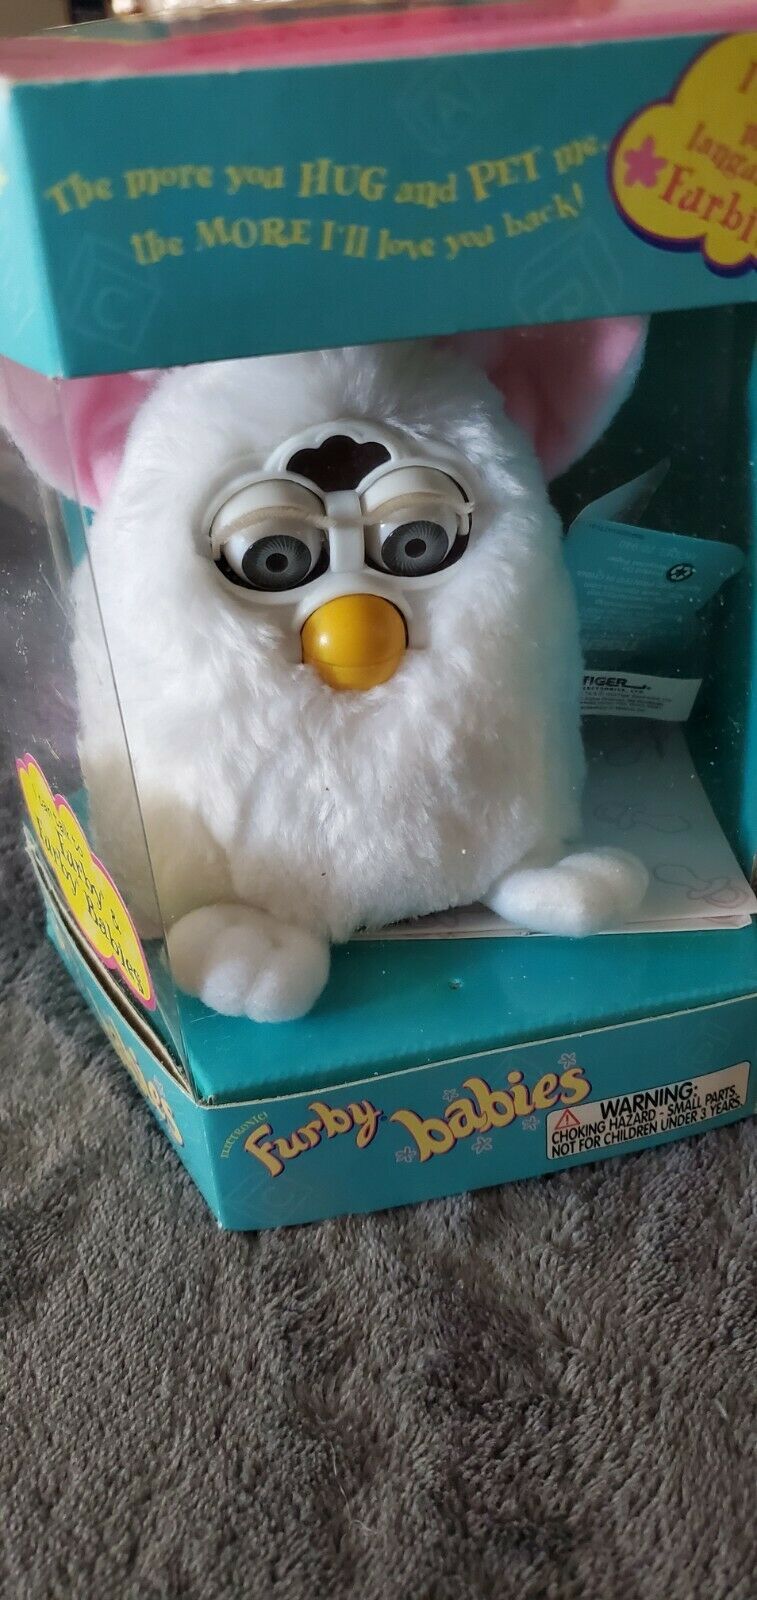  1998 Furby Black with Blue Eyes, Pink Ears and White